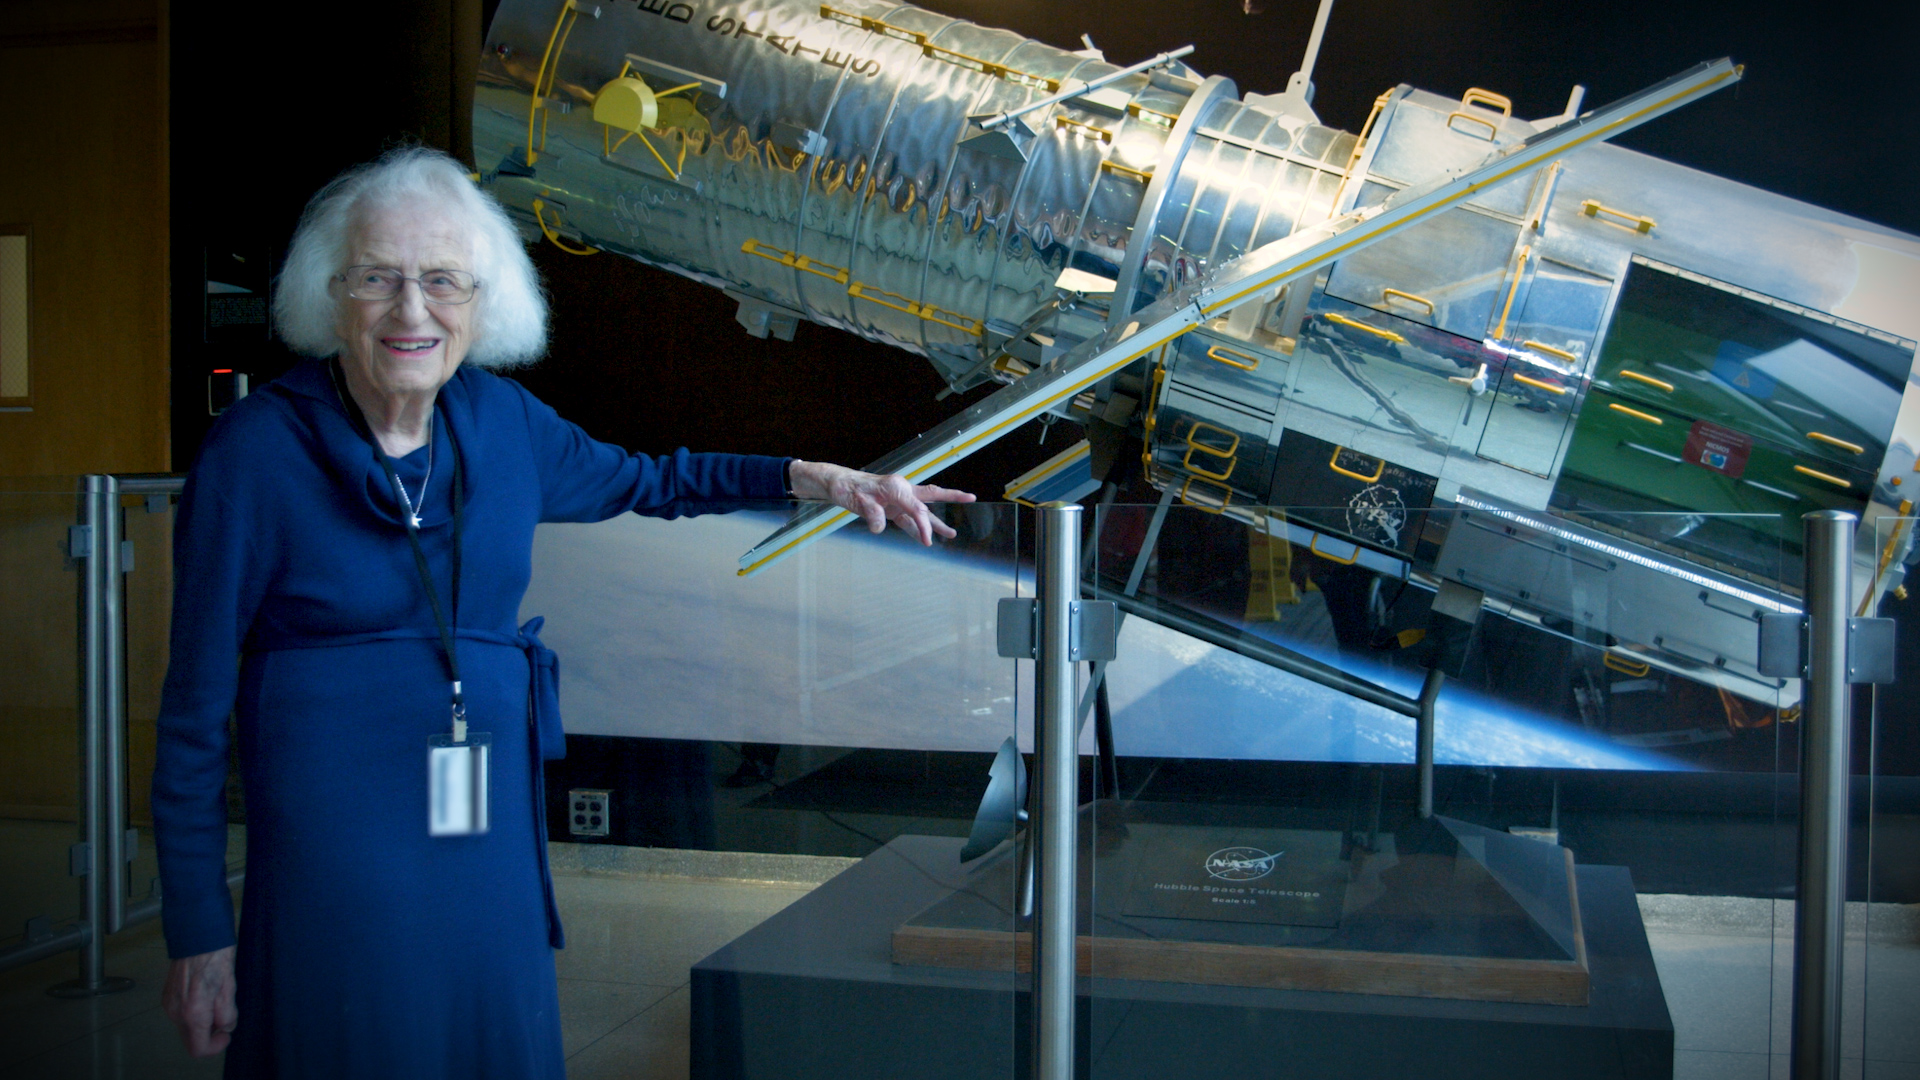 Nancy Grace Roman stands next to a 1/5 scale model of the Hubble Space Telescope